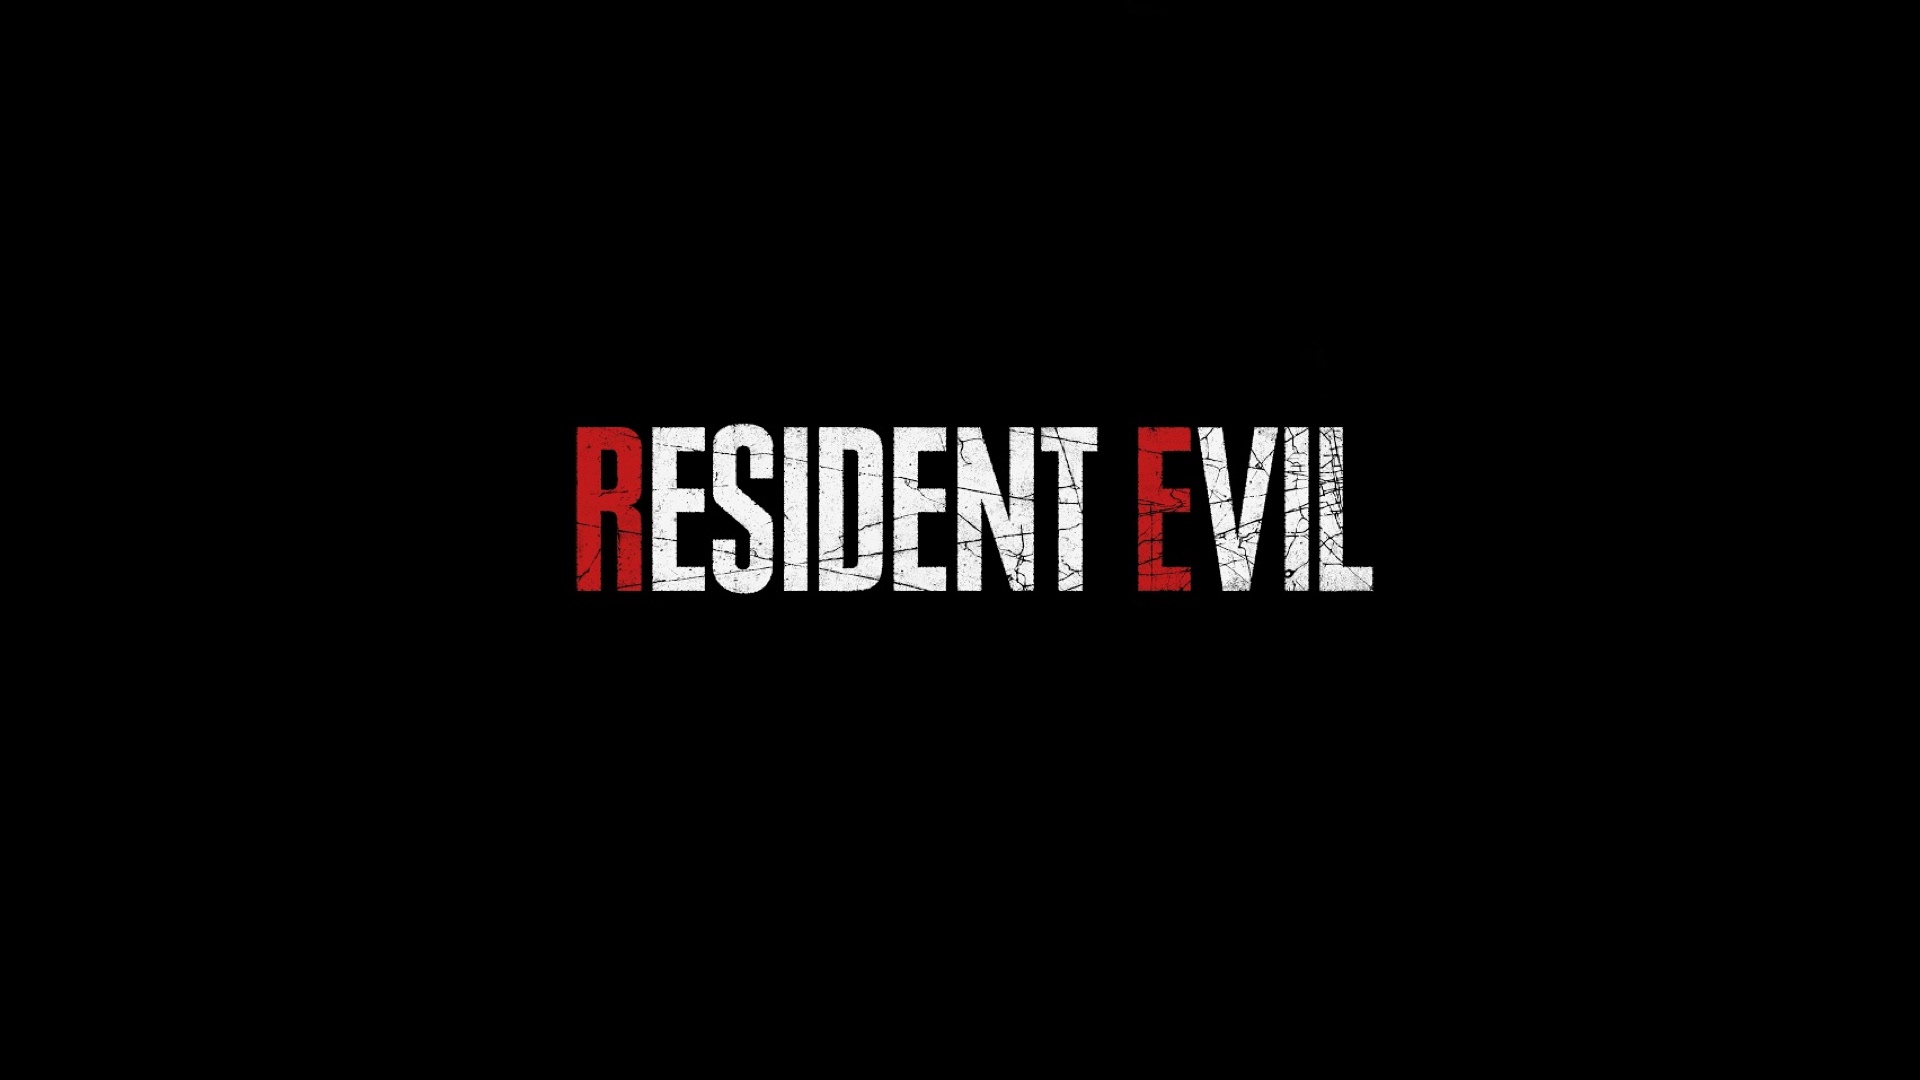 Resident Evil Netflix Series Officially Announced, And It Sounds… Interesting